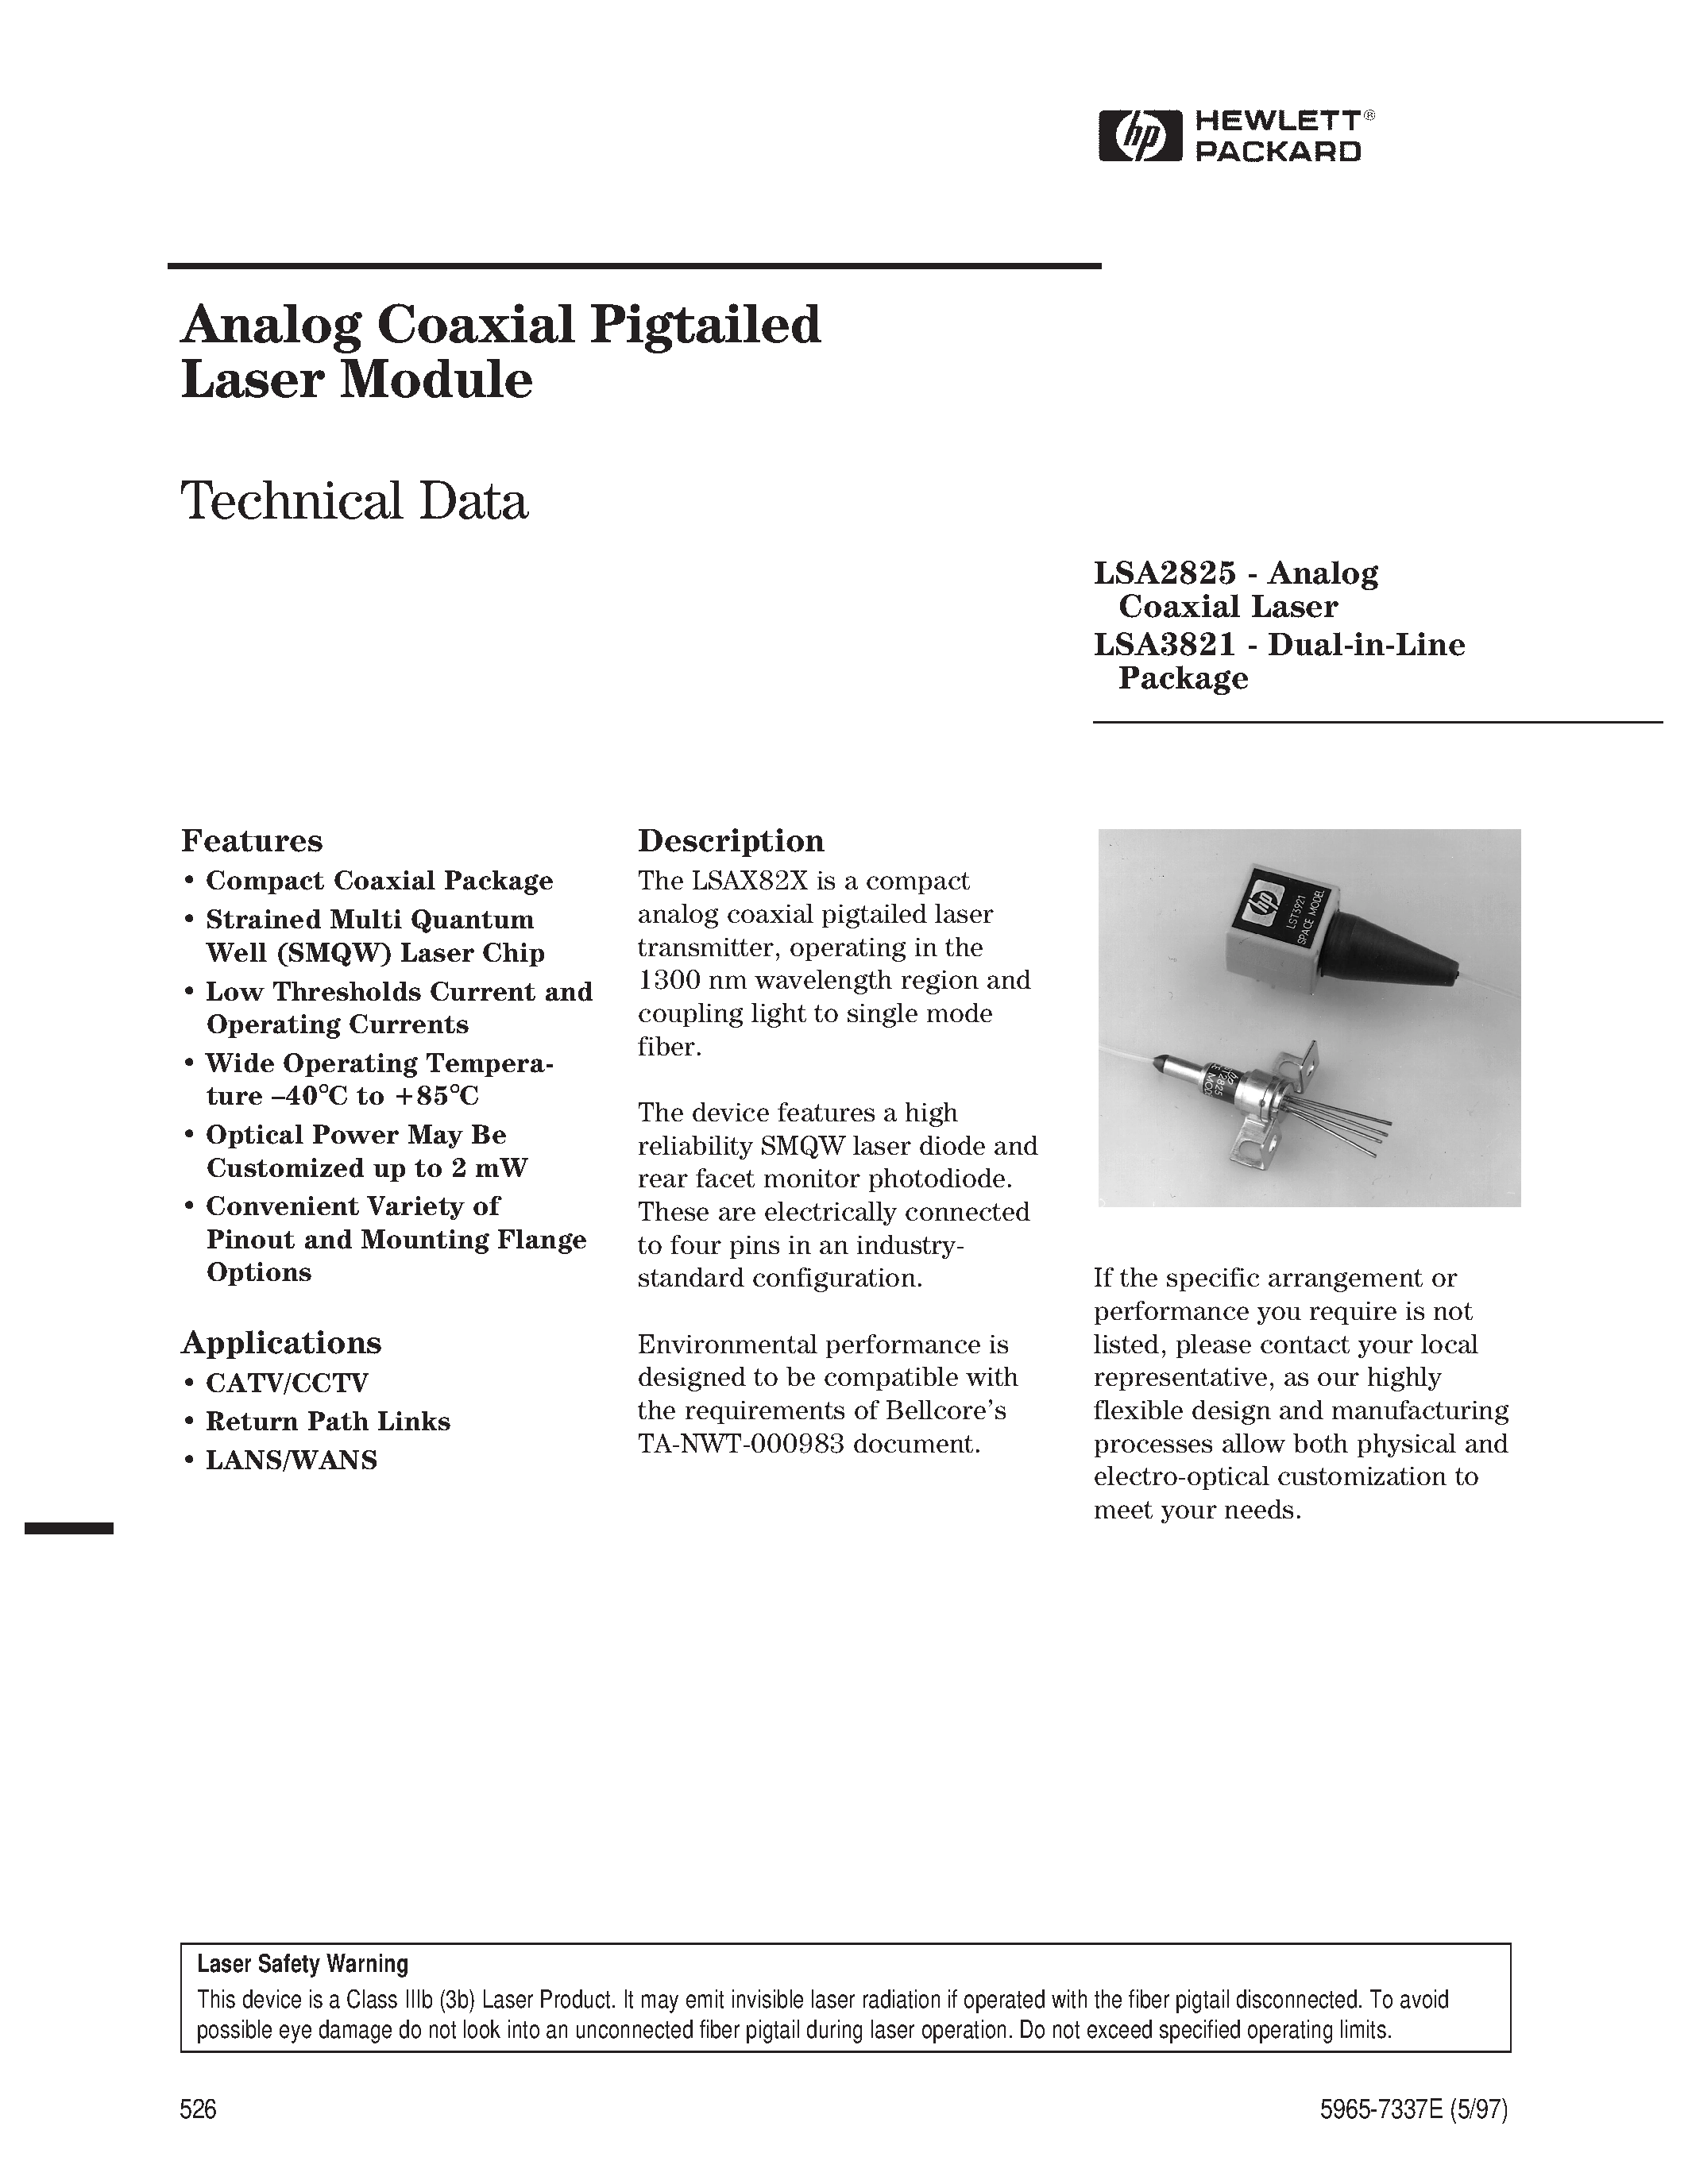 Datasheet LSA2825-B-AS - Analog Coaxial Pigtailed Laser Module page 1